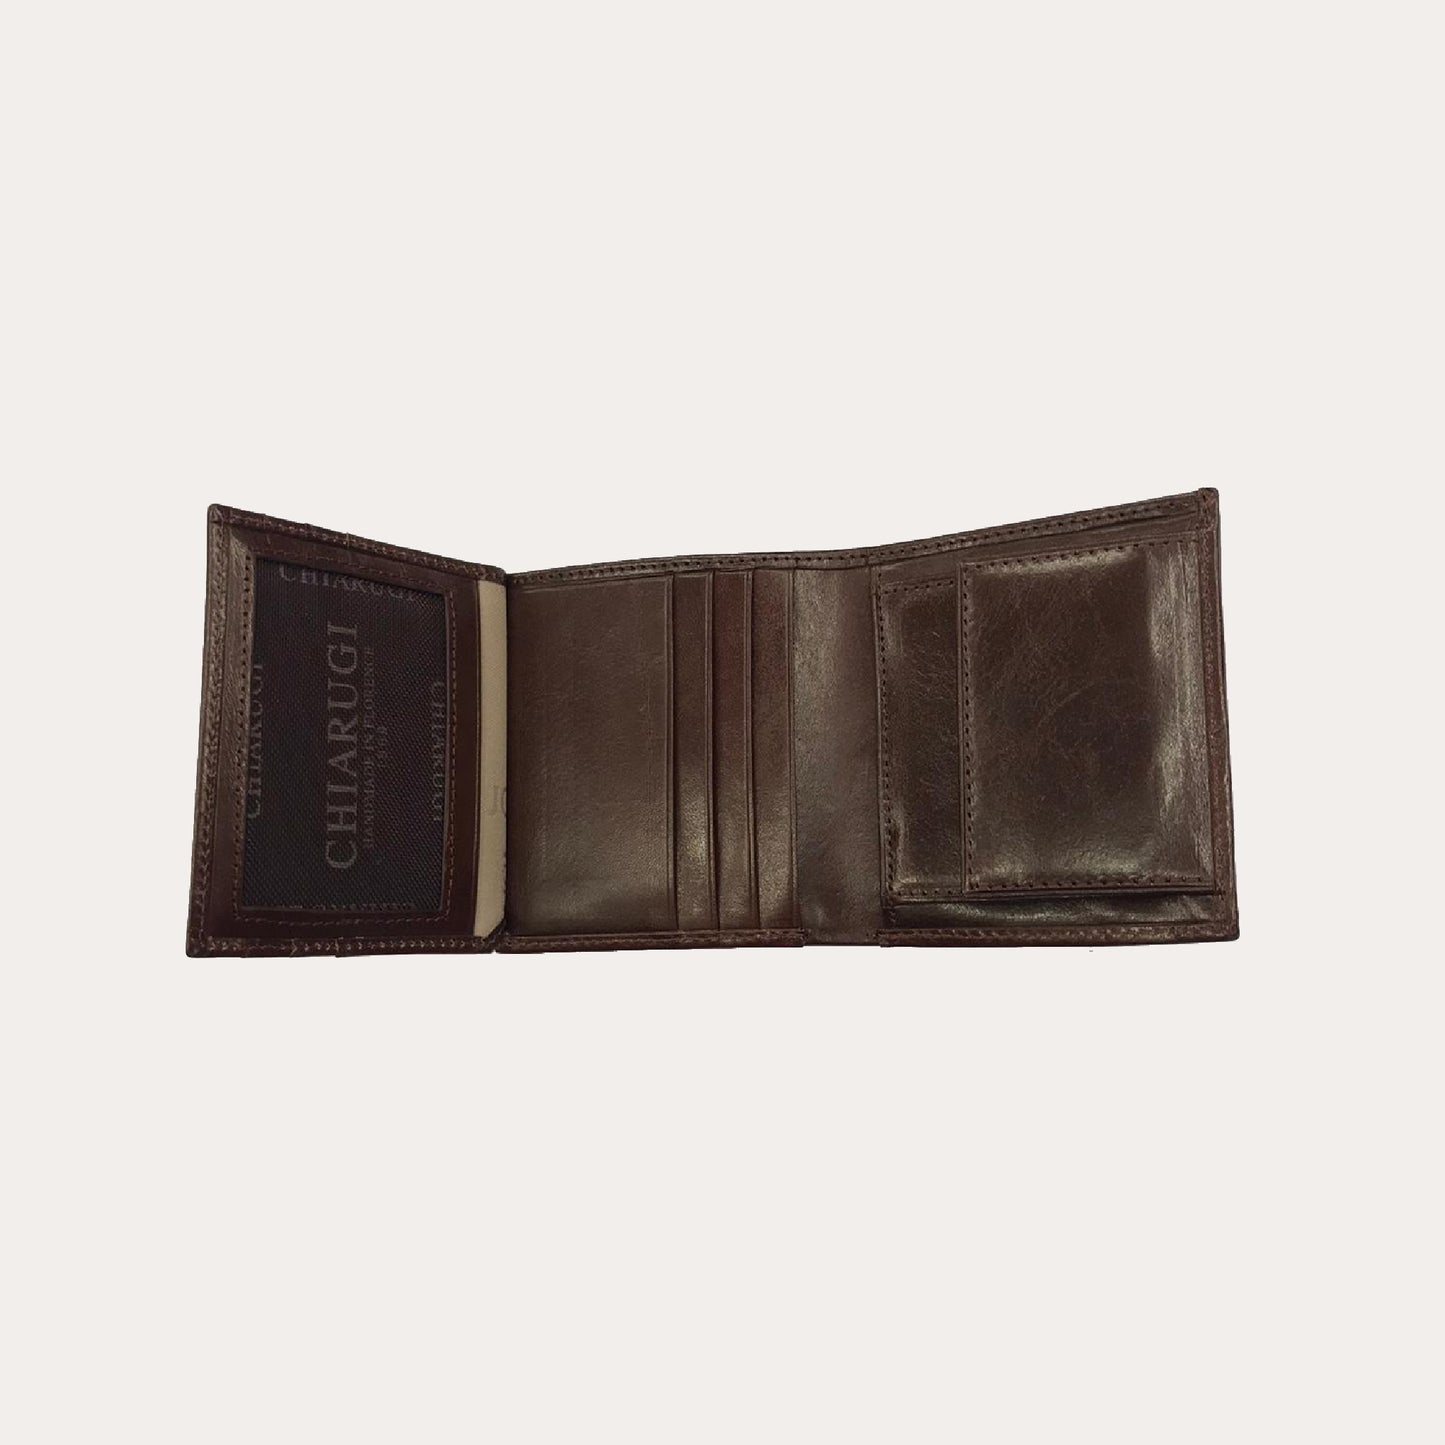 Chiarugi Maroon Leather Wallet-7 Credit Card/Coin Section